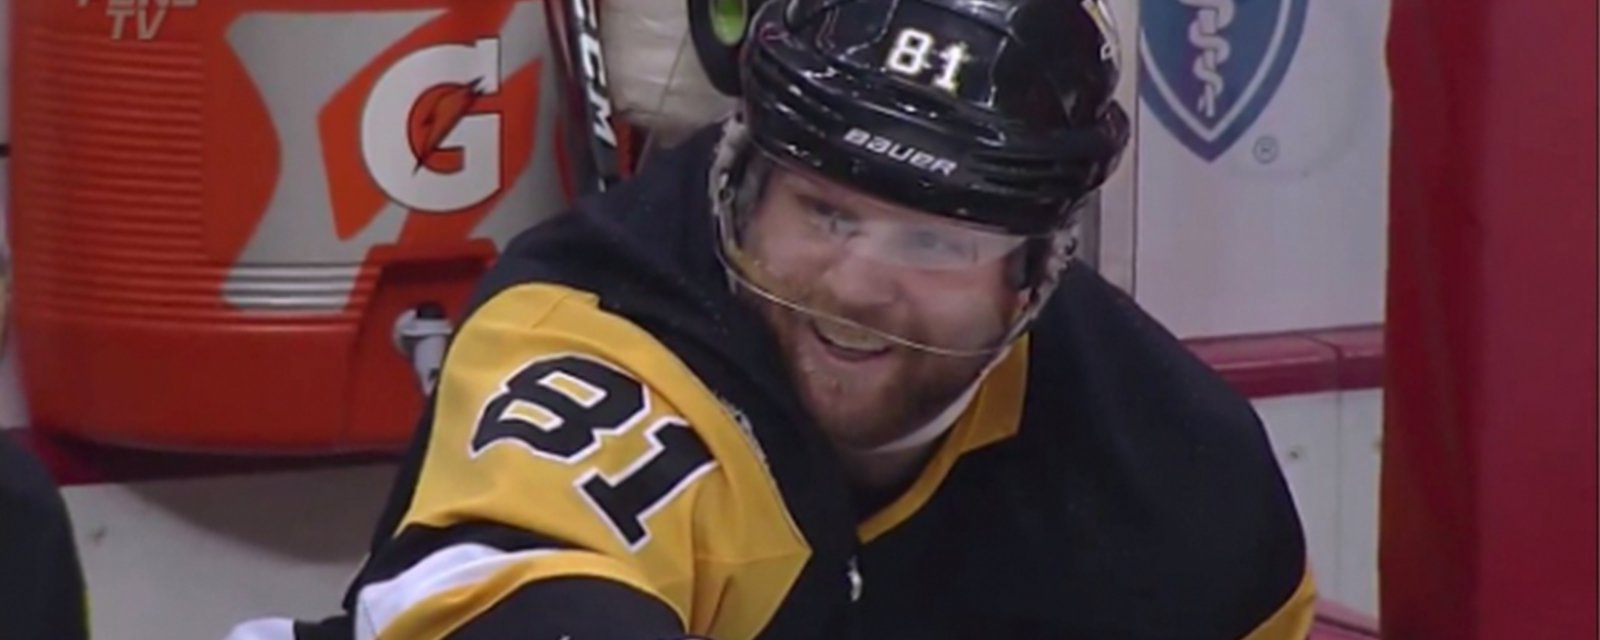 Fans chant “Thank you, Phil!” after Kessel’s goal wins everyone a Big Mac 